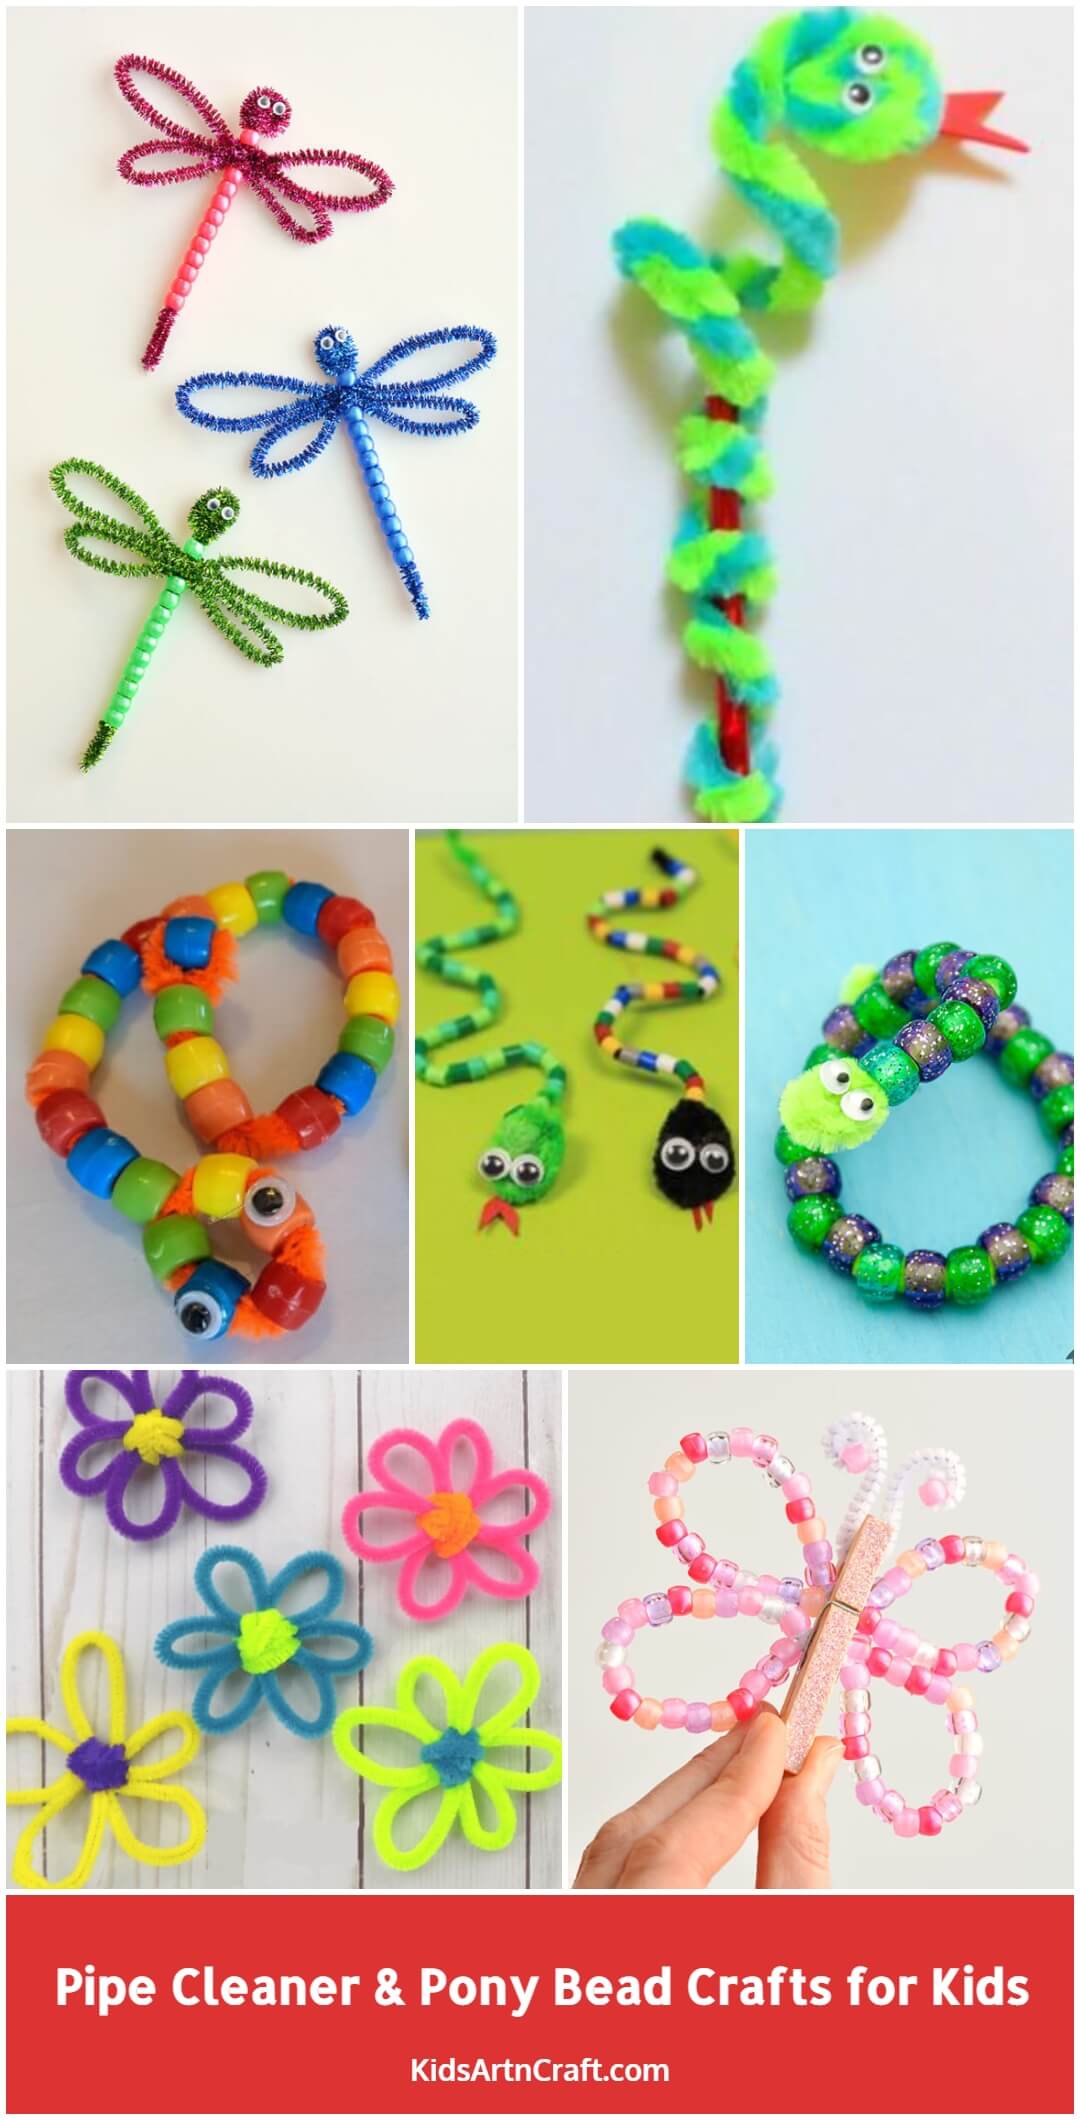 Pipe Cleaner & Pony Bead Crafts for Kids